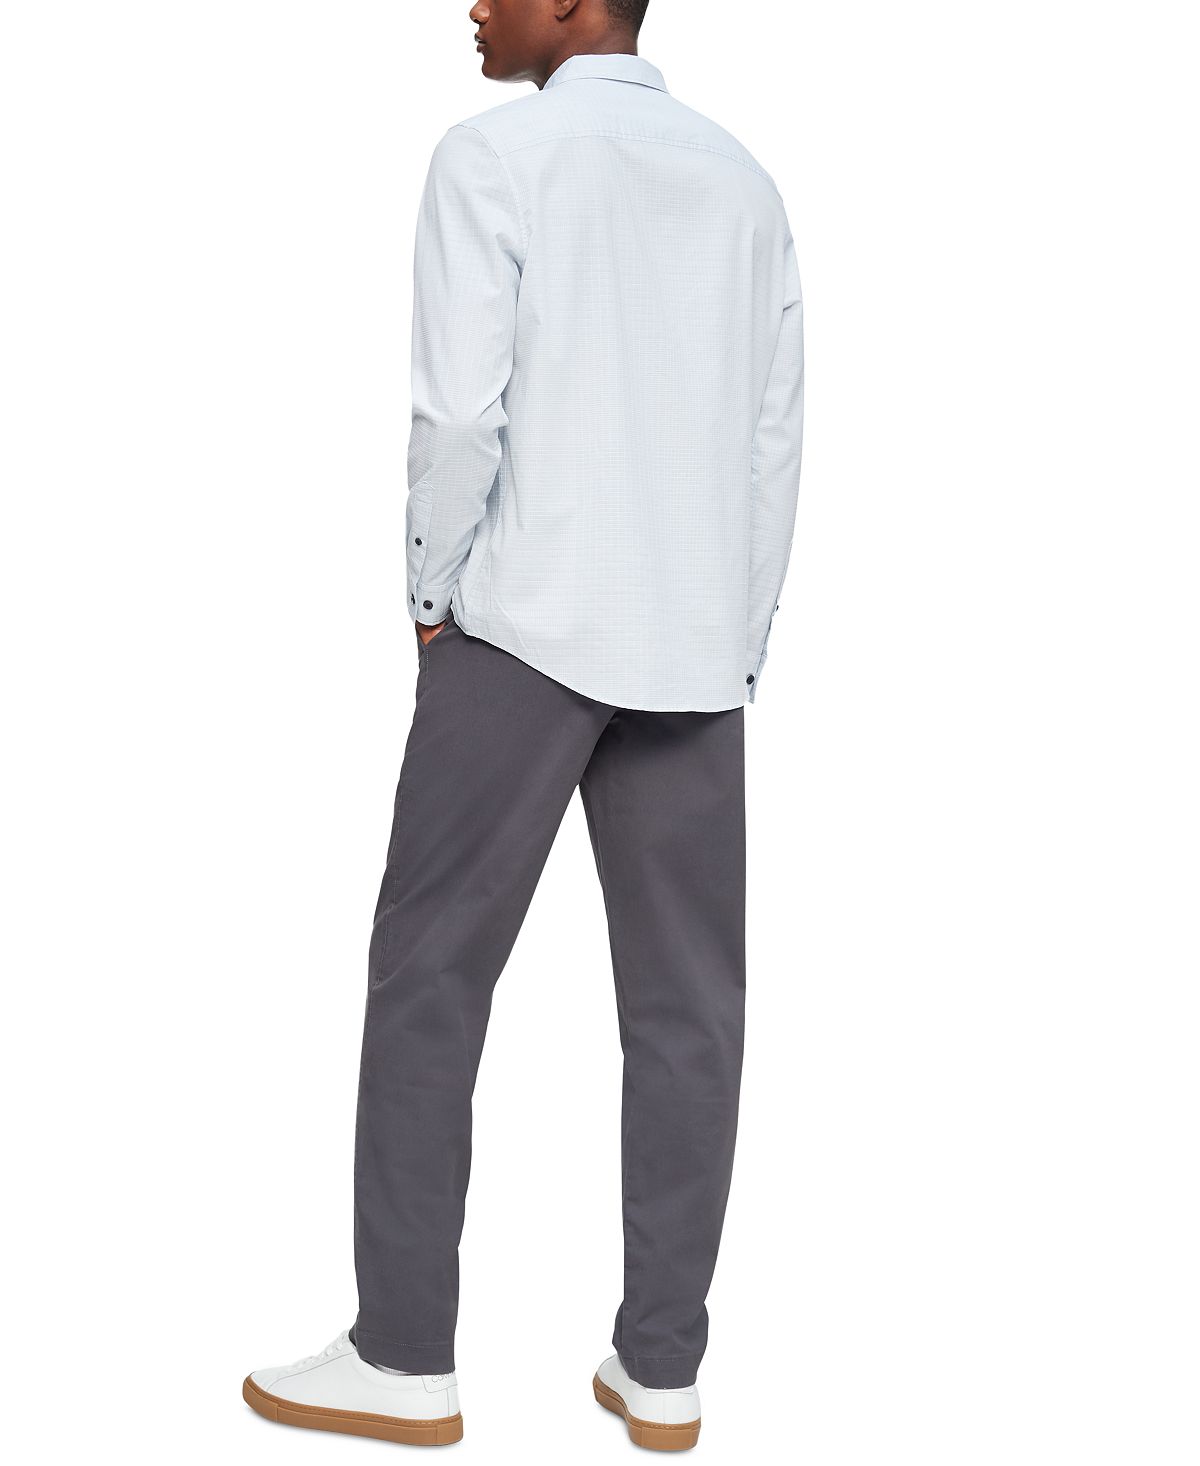 Calvin Klein Straight-fit Stretch Chino Pants Gray Pinstripe